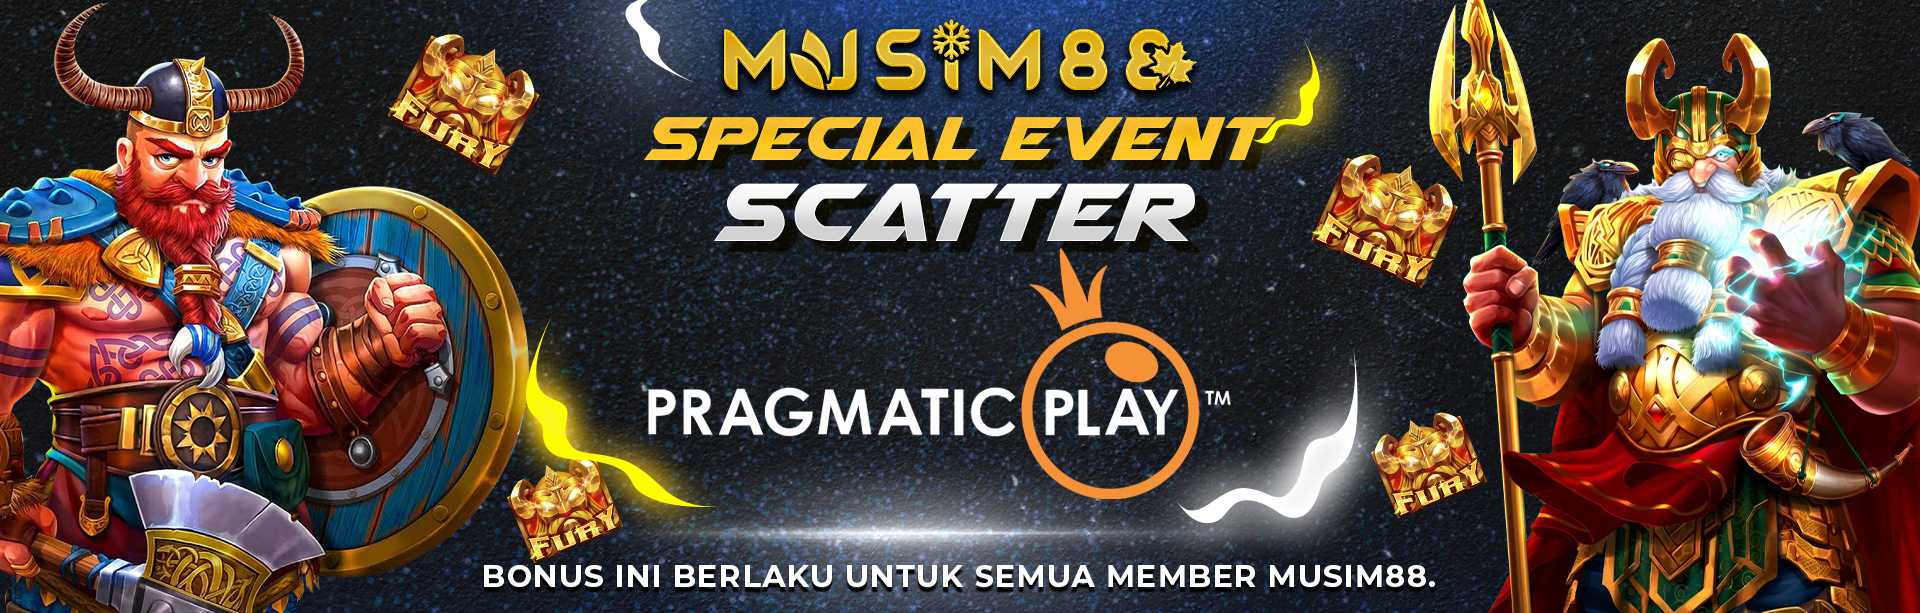 EVENT SCATTER x PRAGMATIC PLAY	